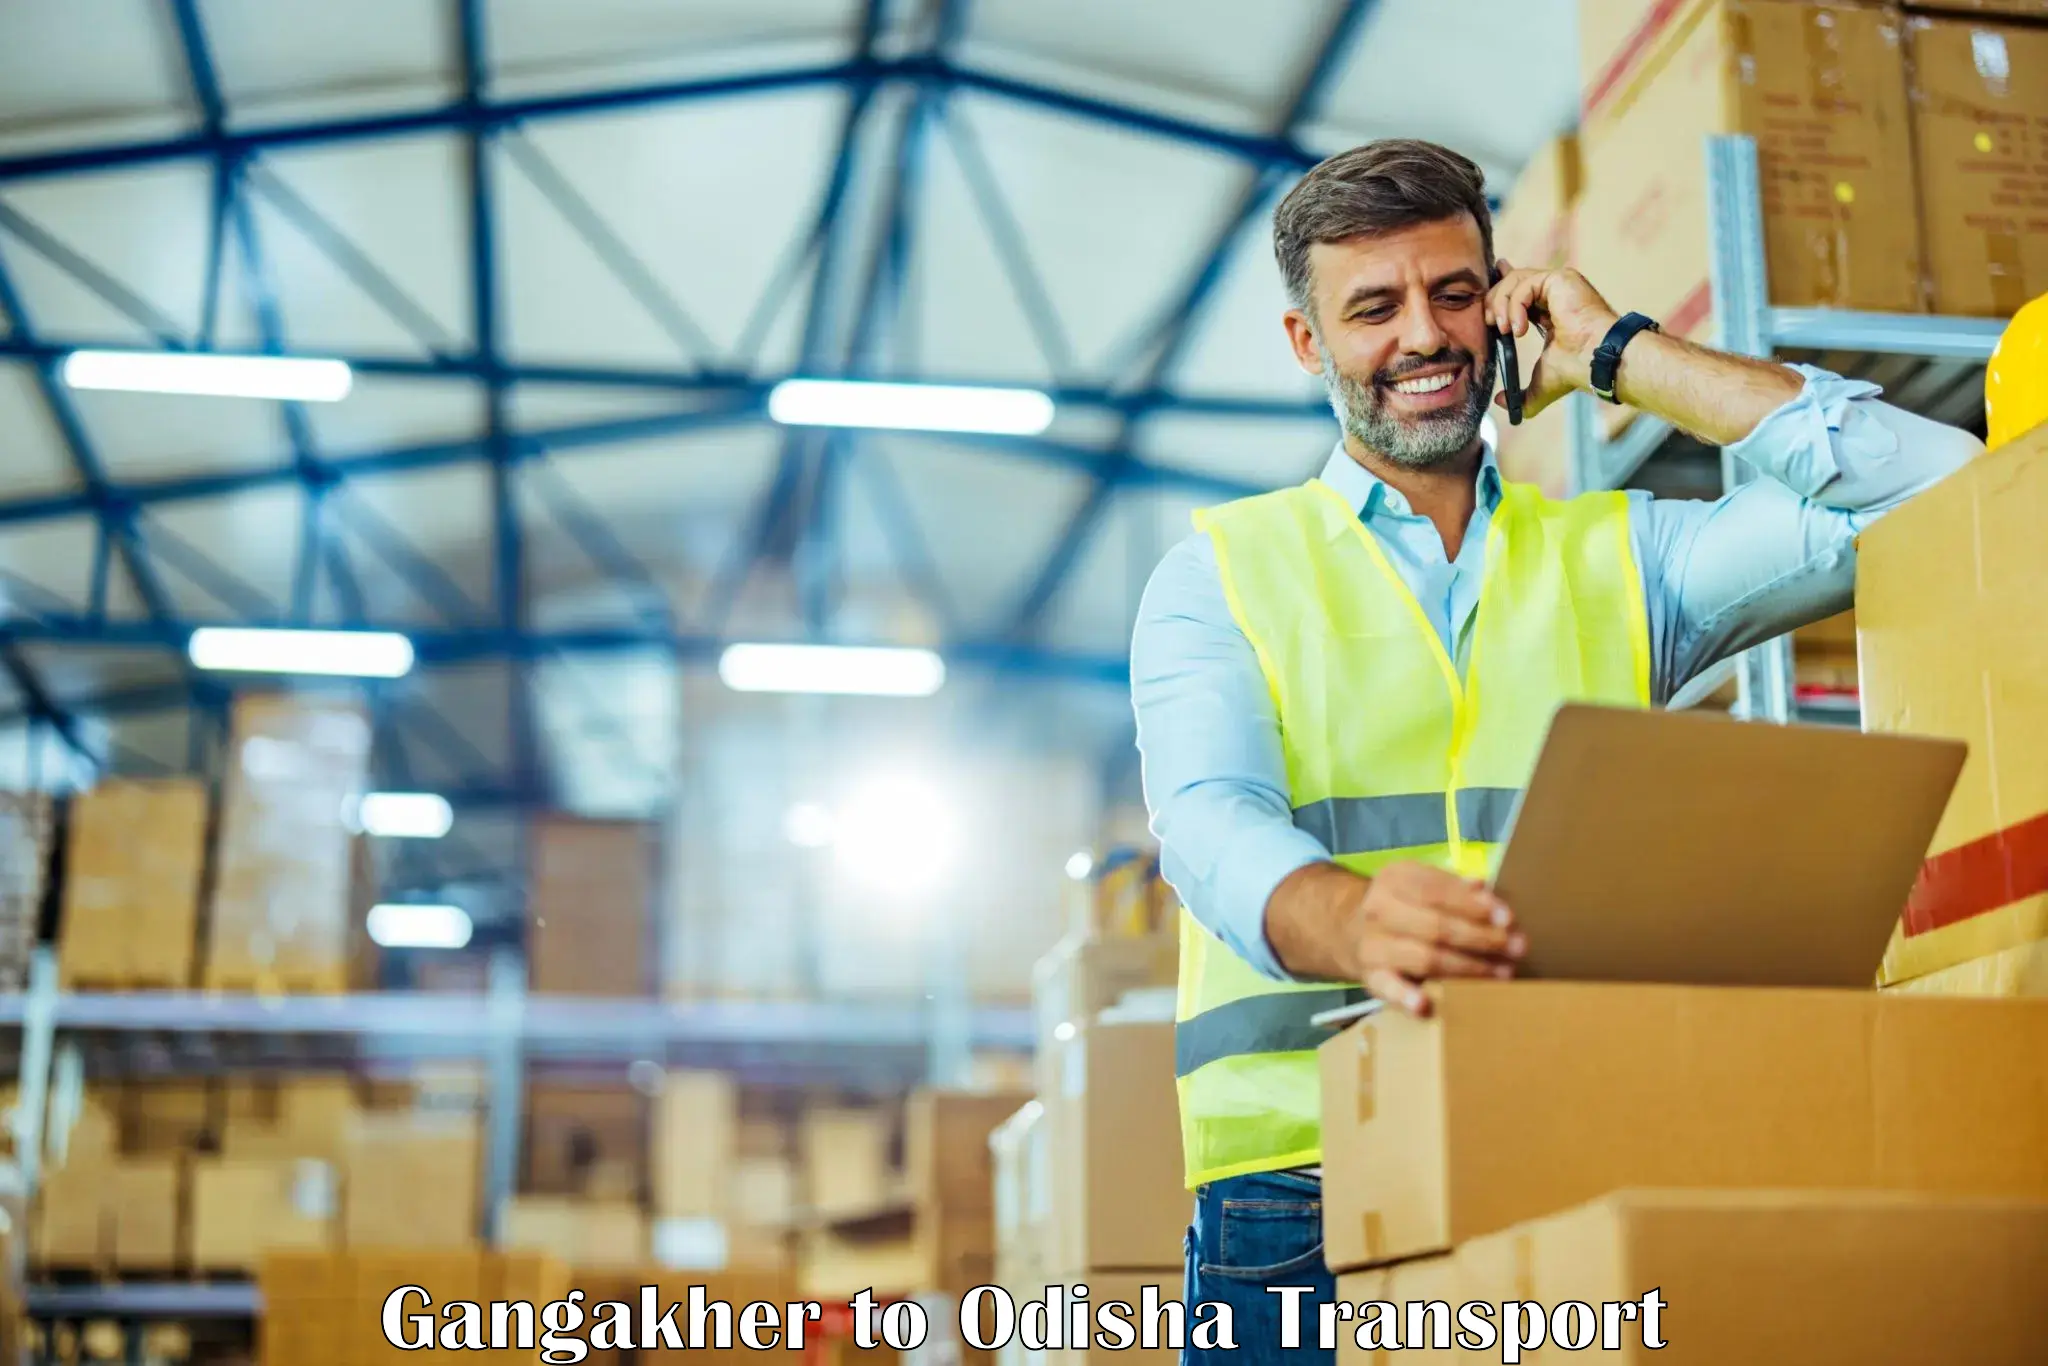 Truck transport companies in India Gangakher to Chatrapur